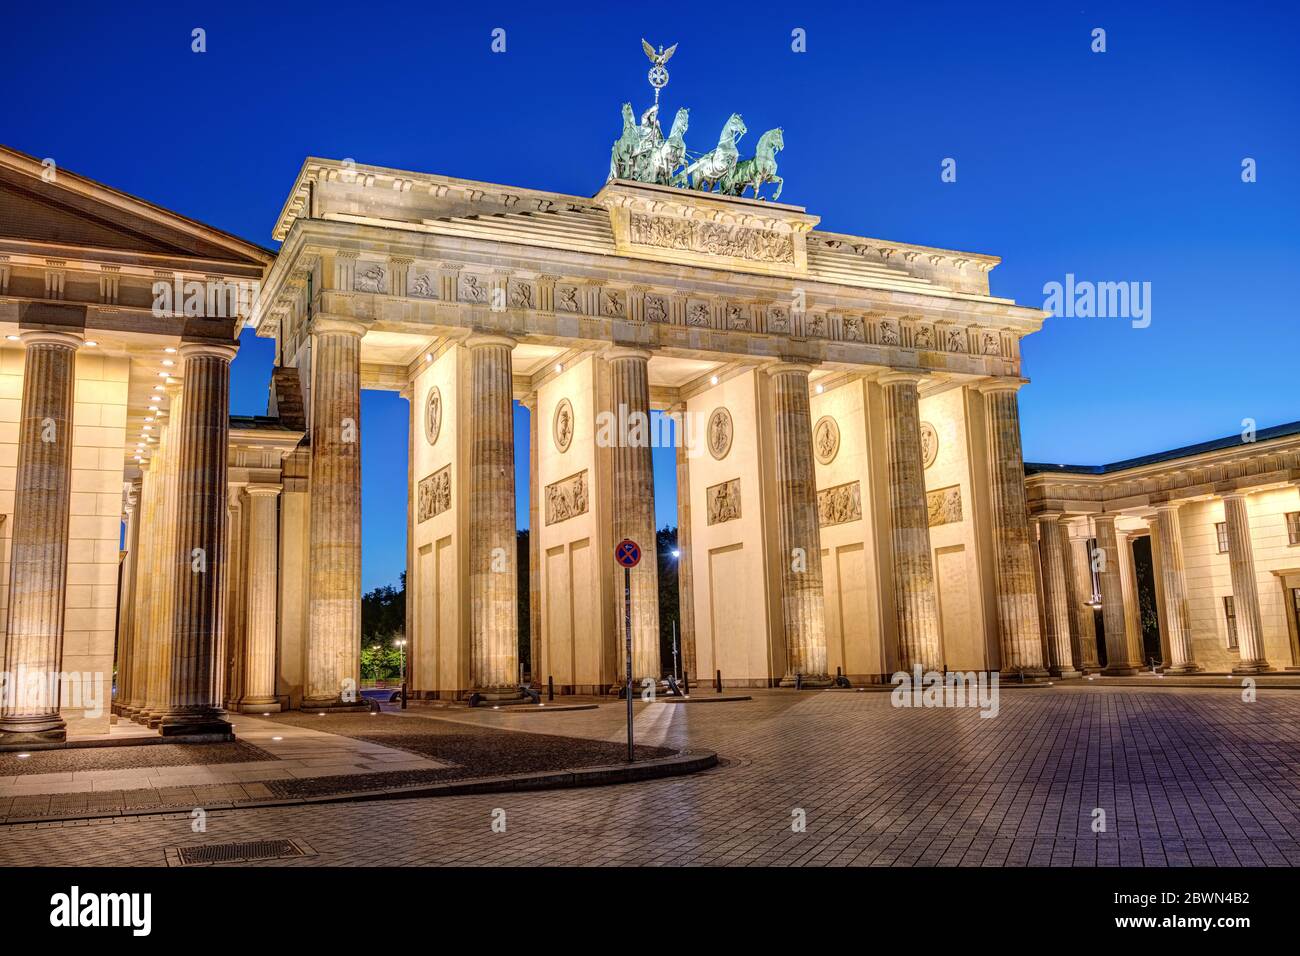 The famous illuminated Brandenburg Gate in Berlin at blue hour with no people Stock Photo